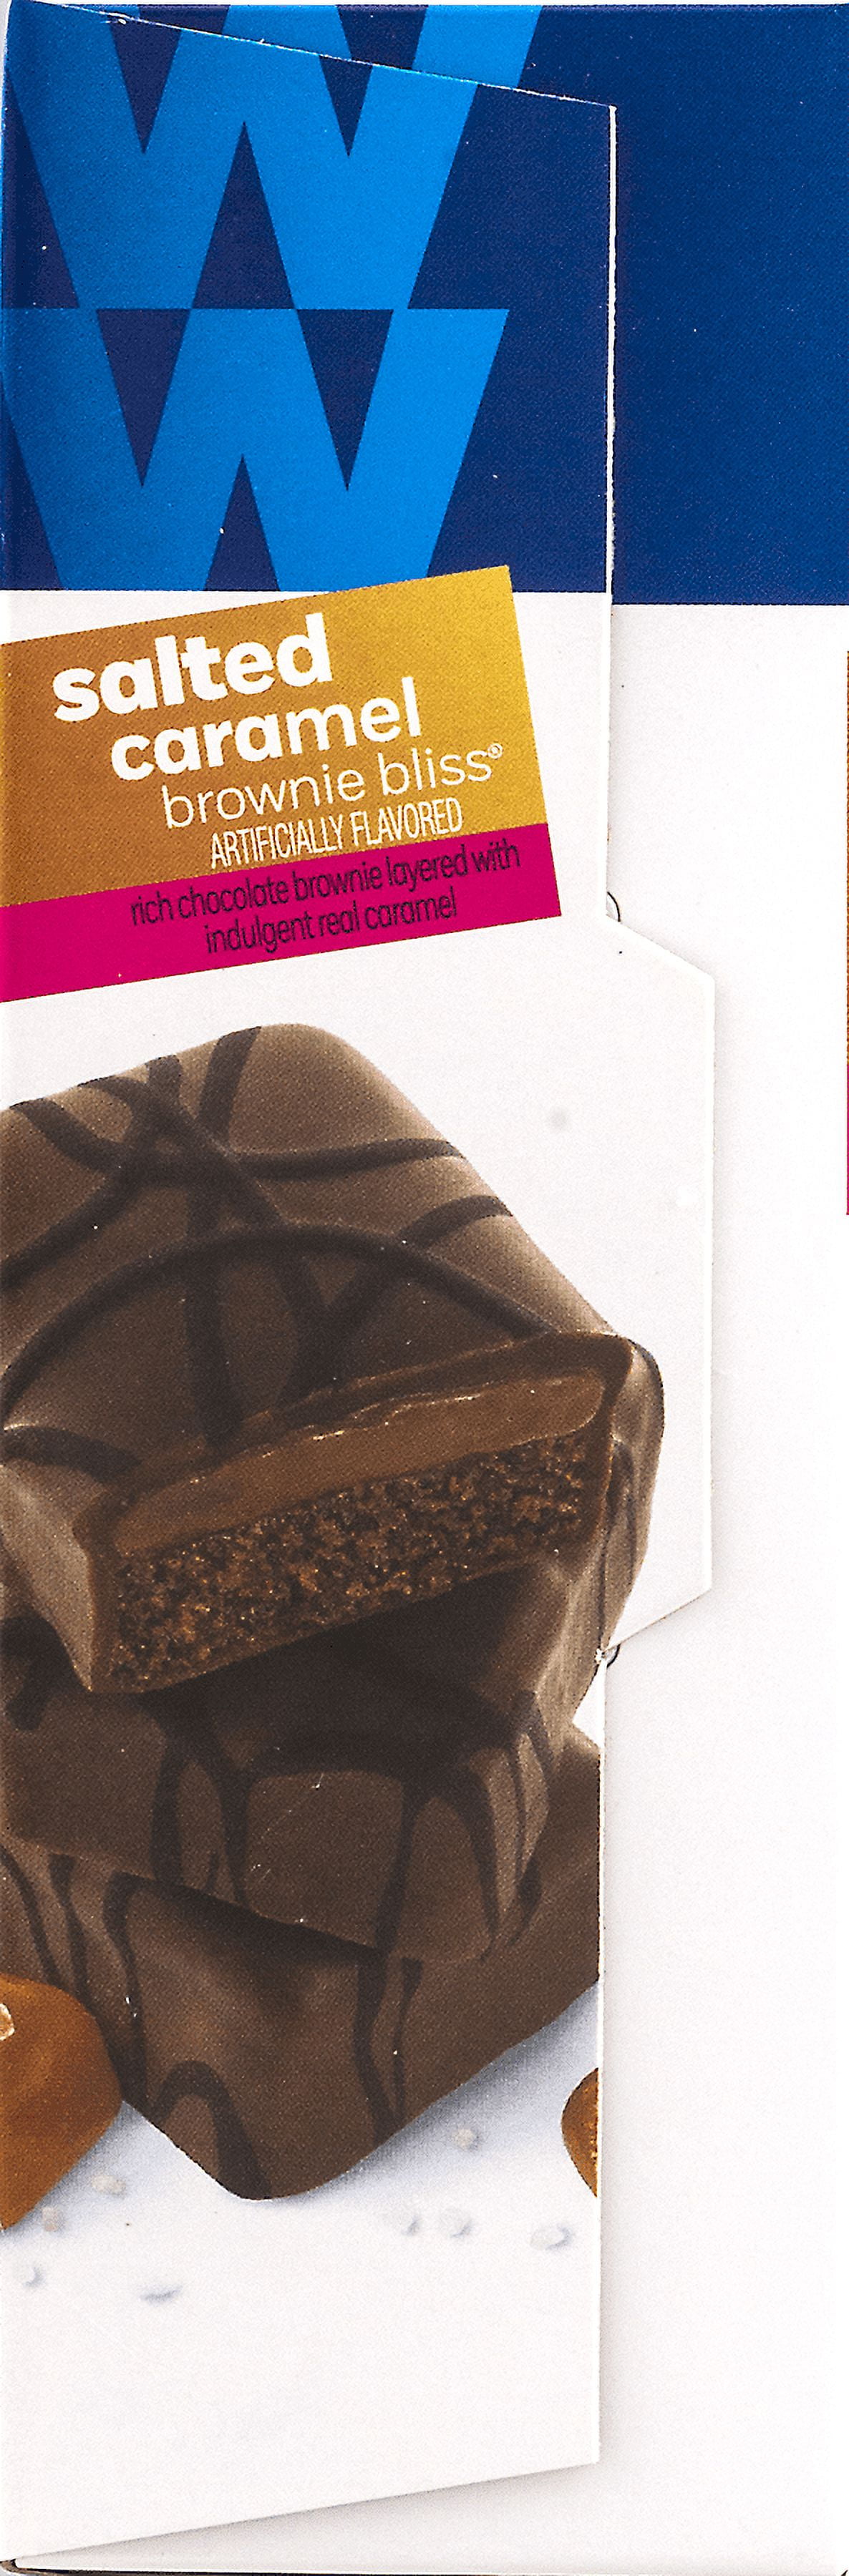 Dawn Food Products Weight Watchers Brownie Bliss Brownies, 6 ea